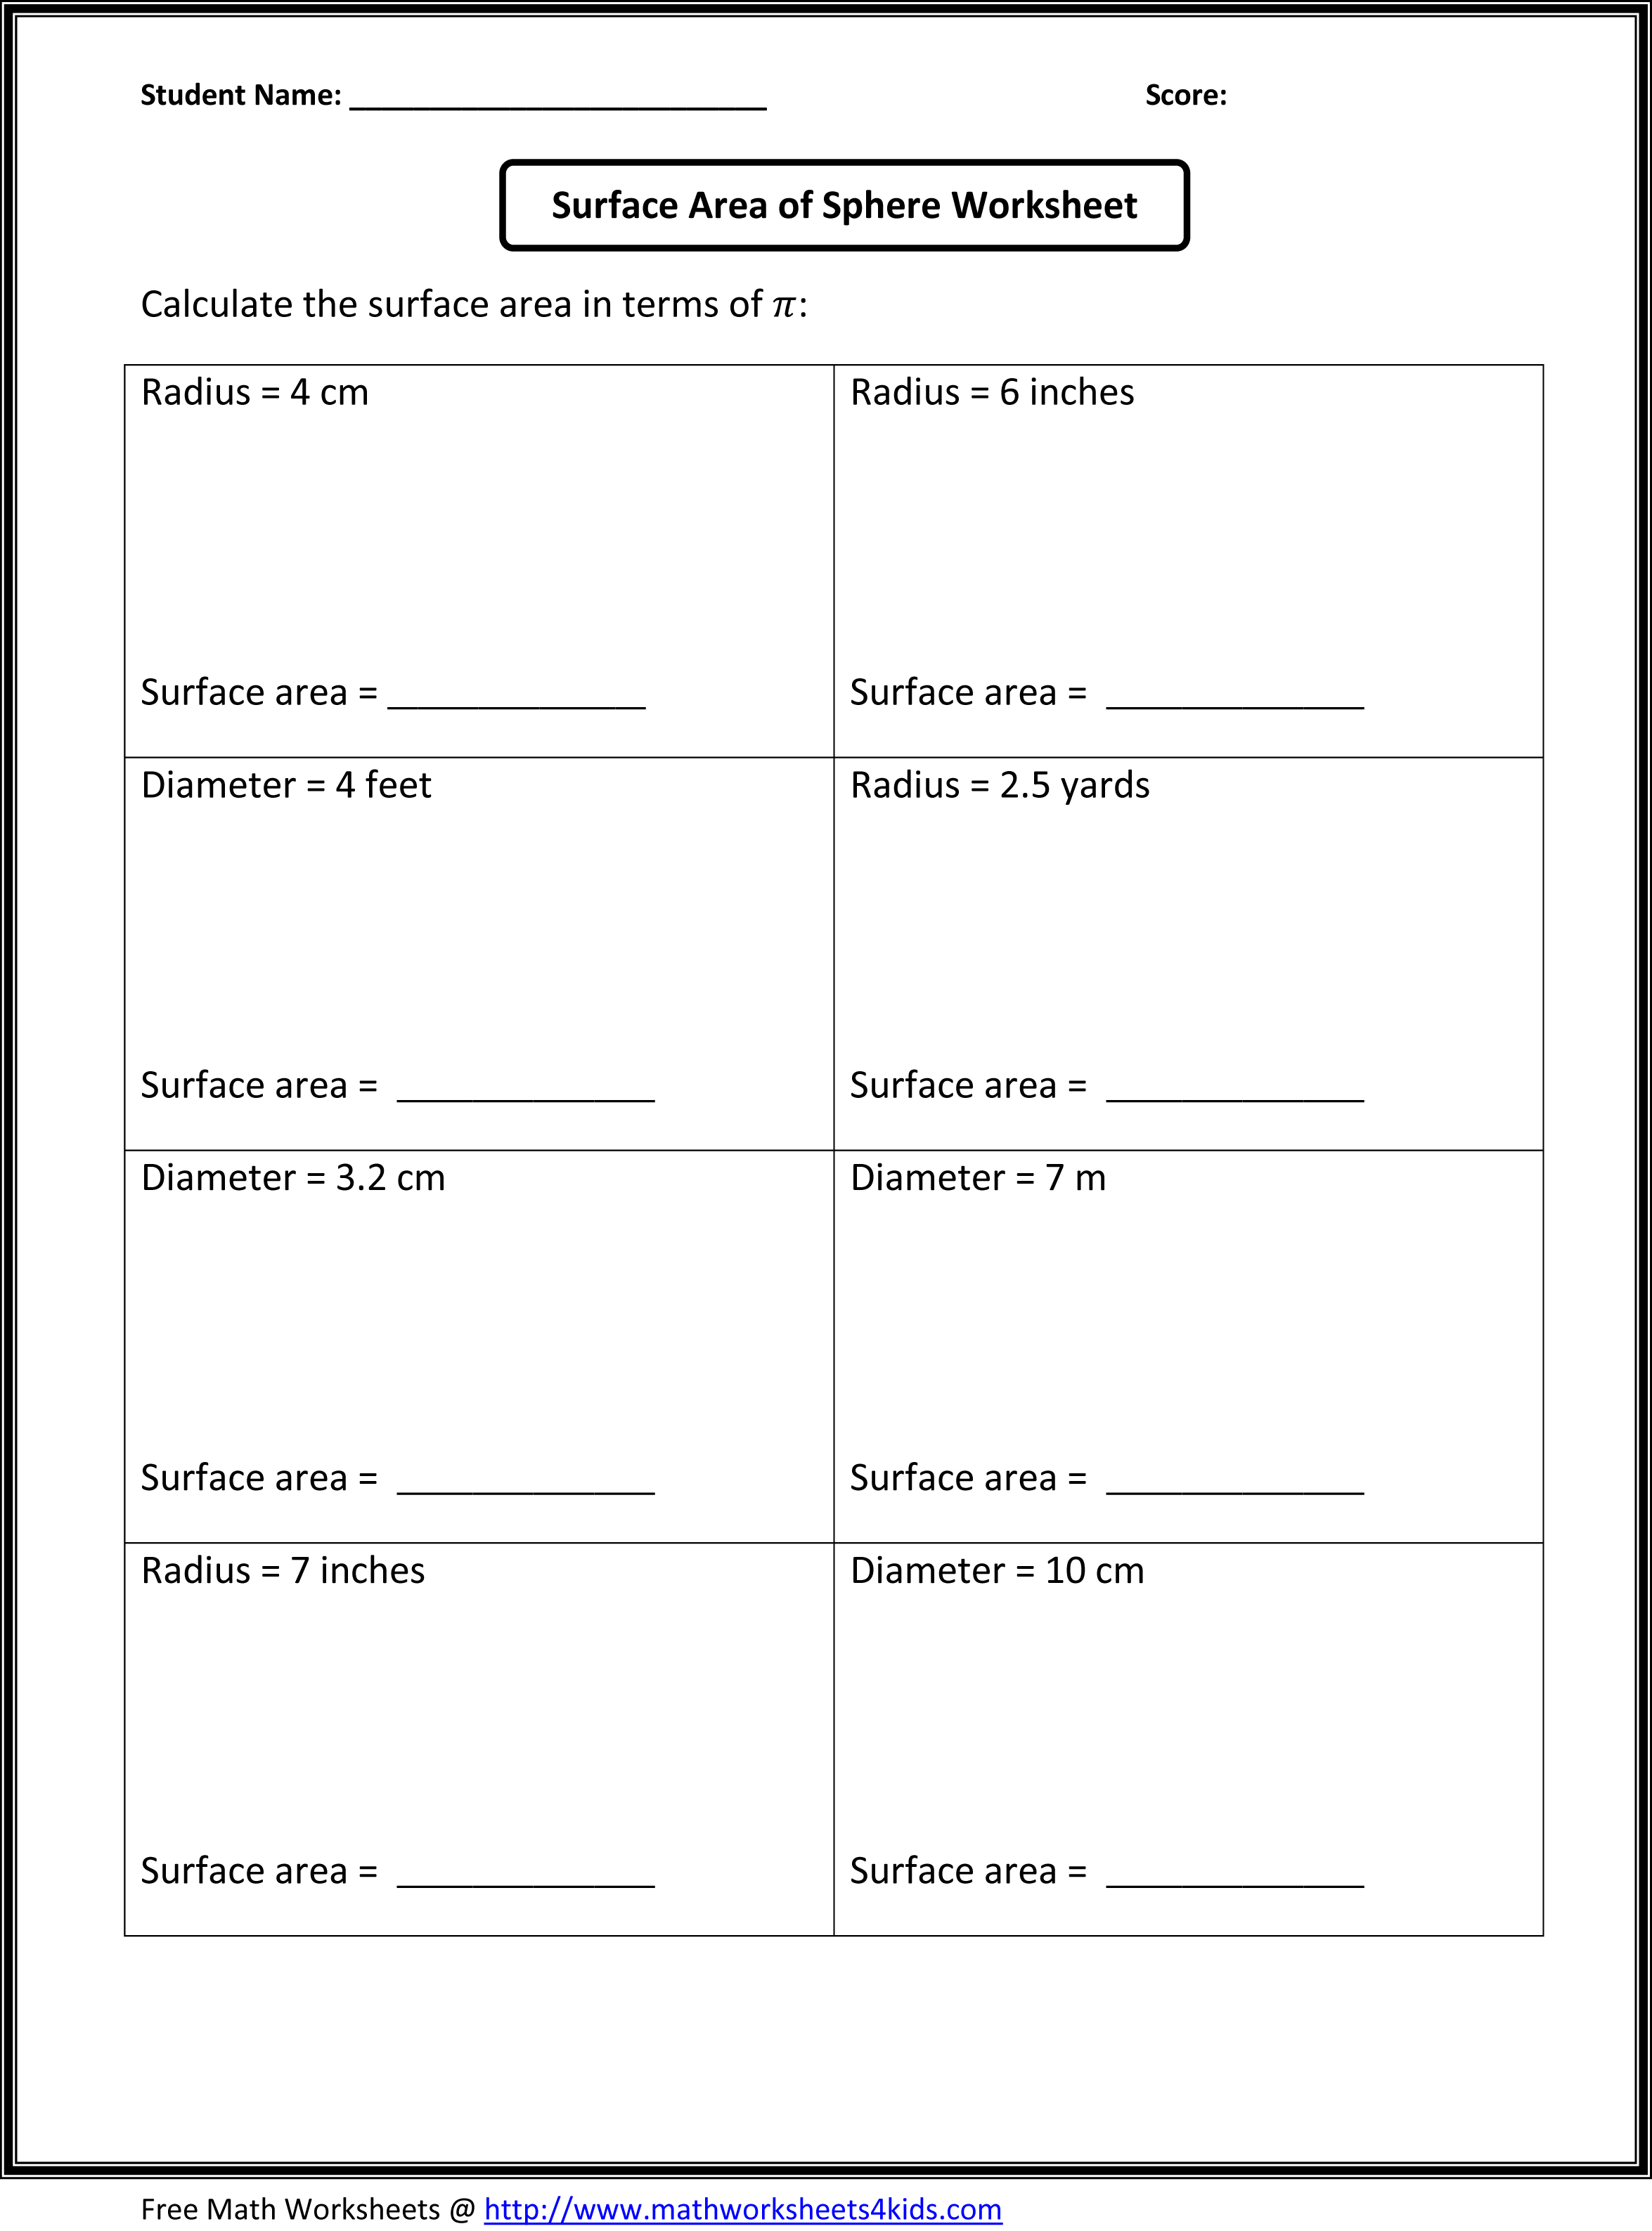 14 Best Images of Absolute Value Problems Worksheet ...